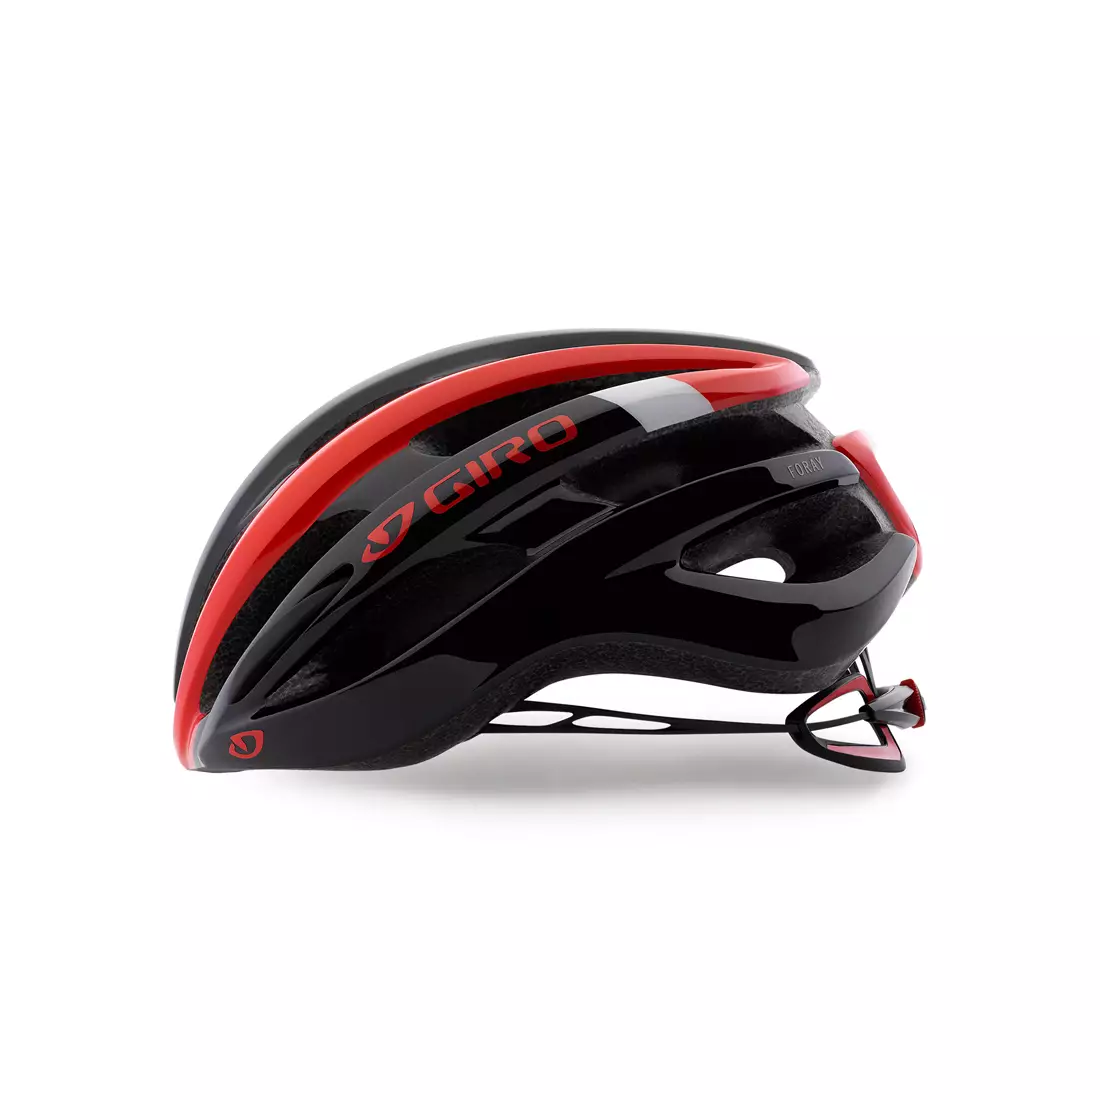 GIRO FORAY - black and red bicycle helmet